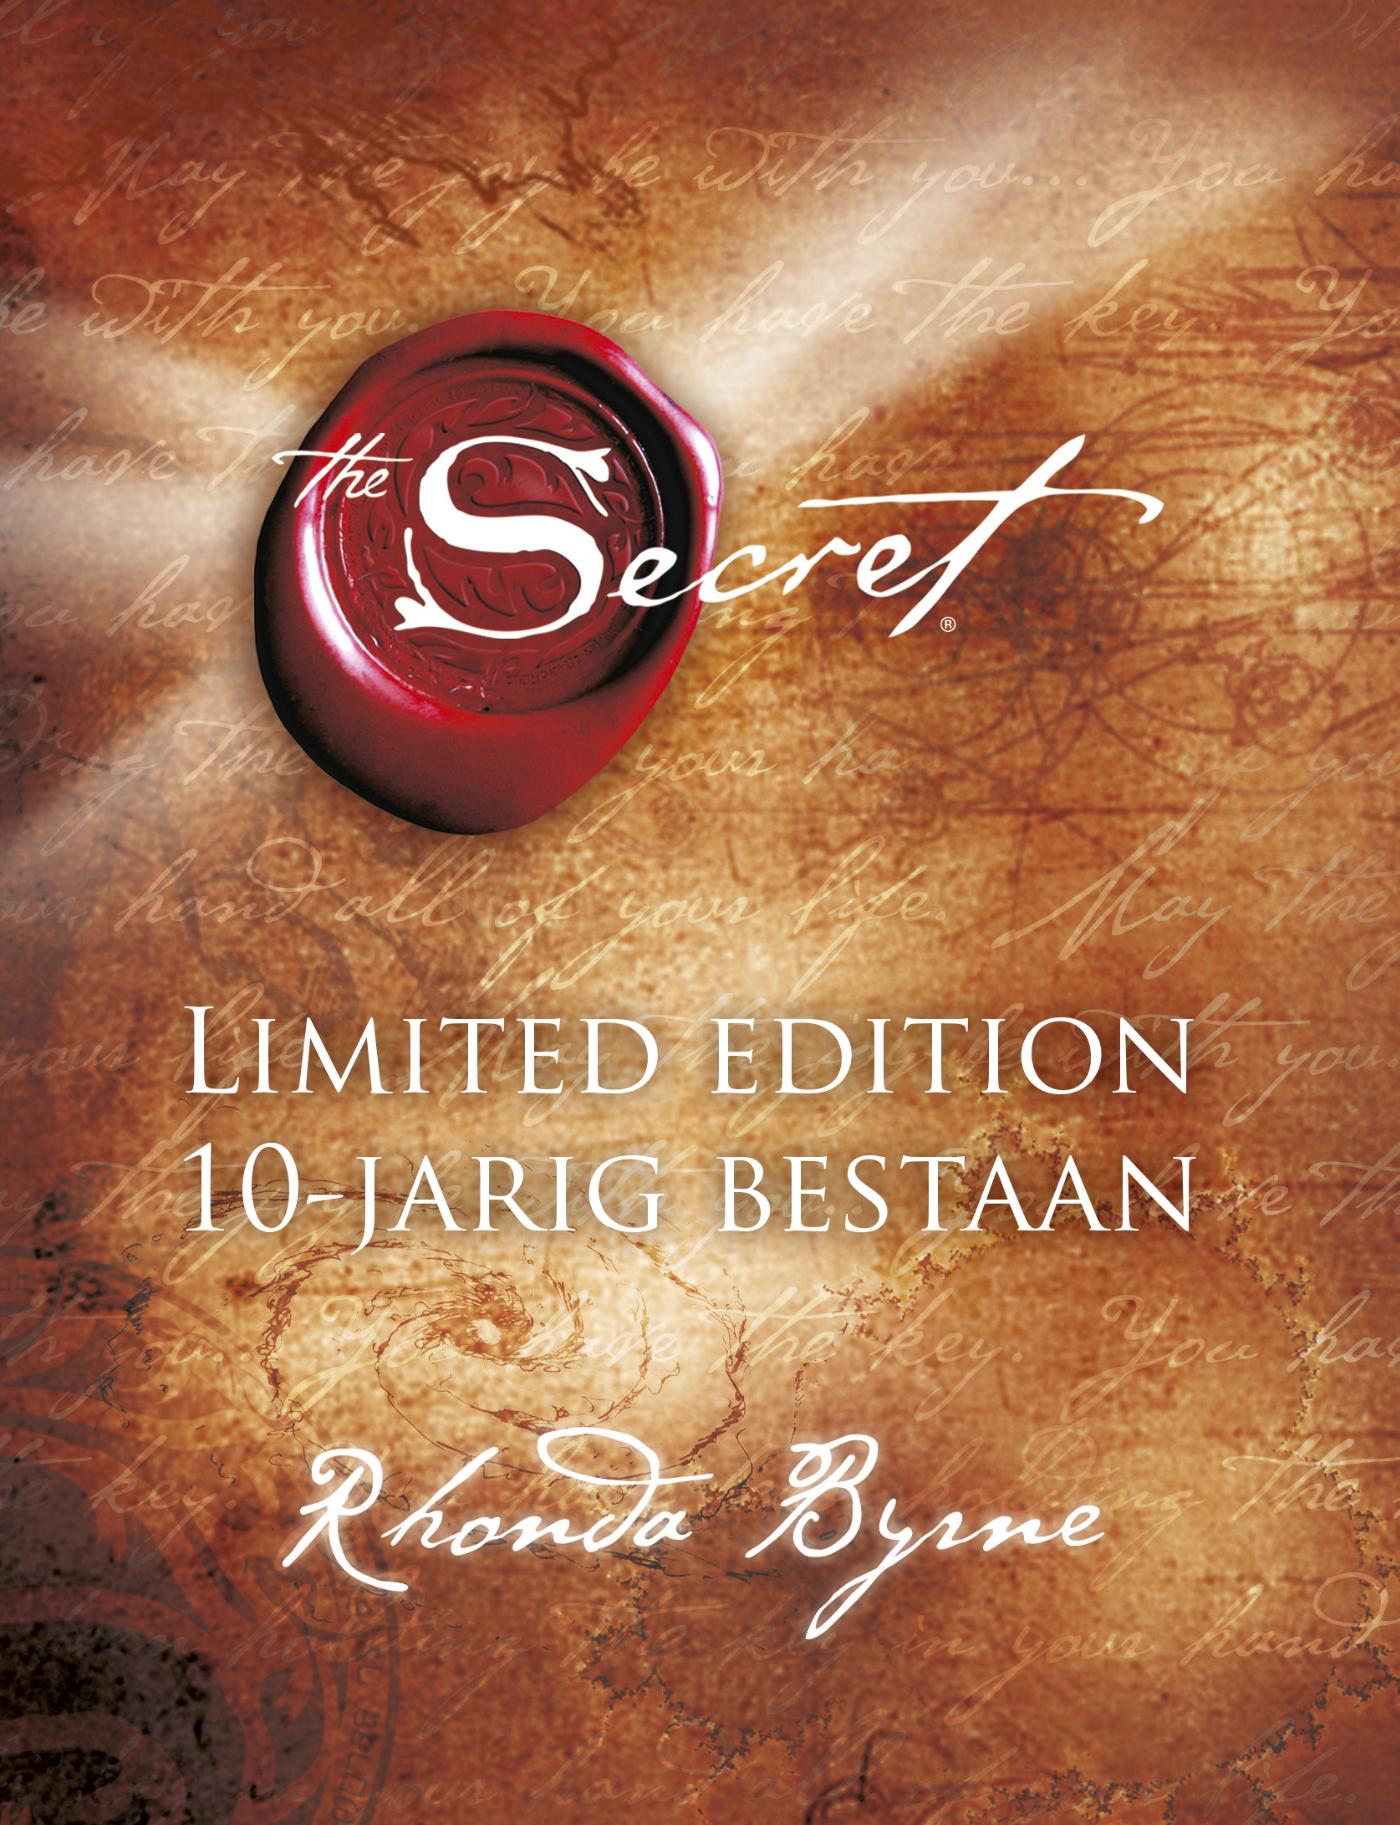 The Secret Limited Edition